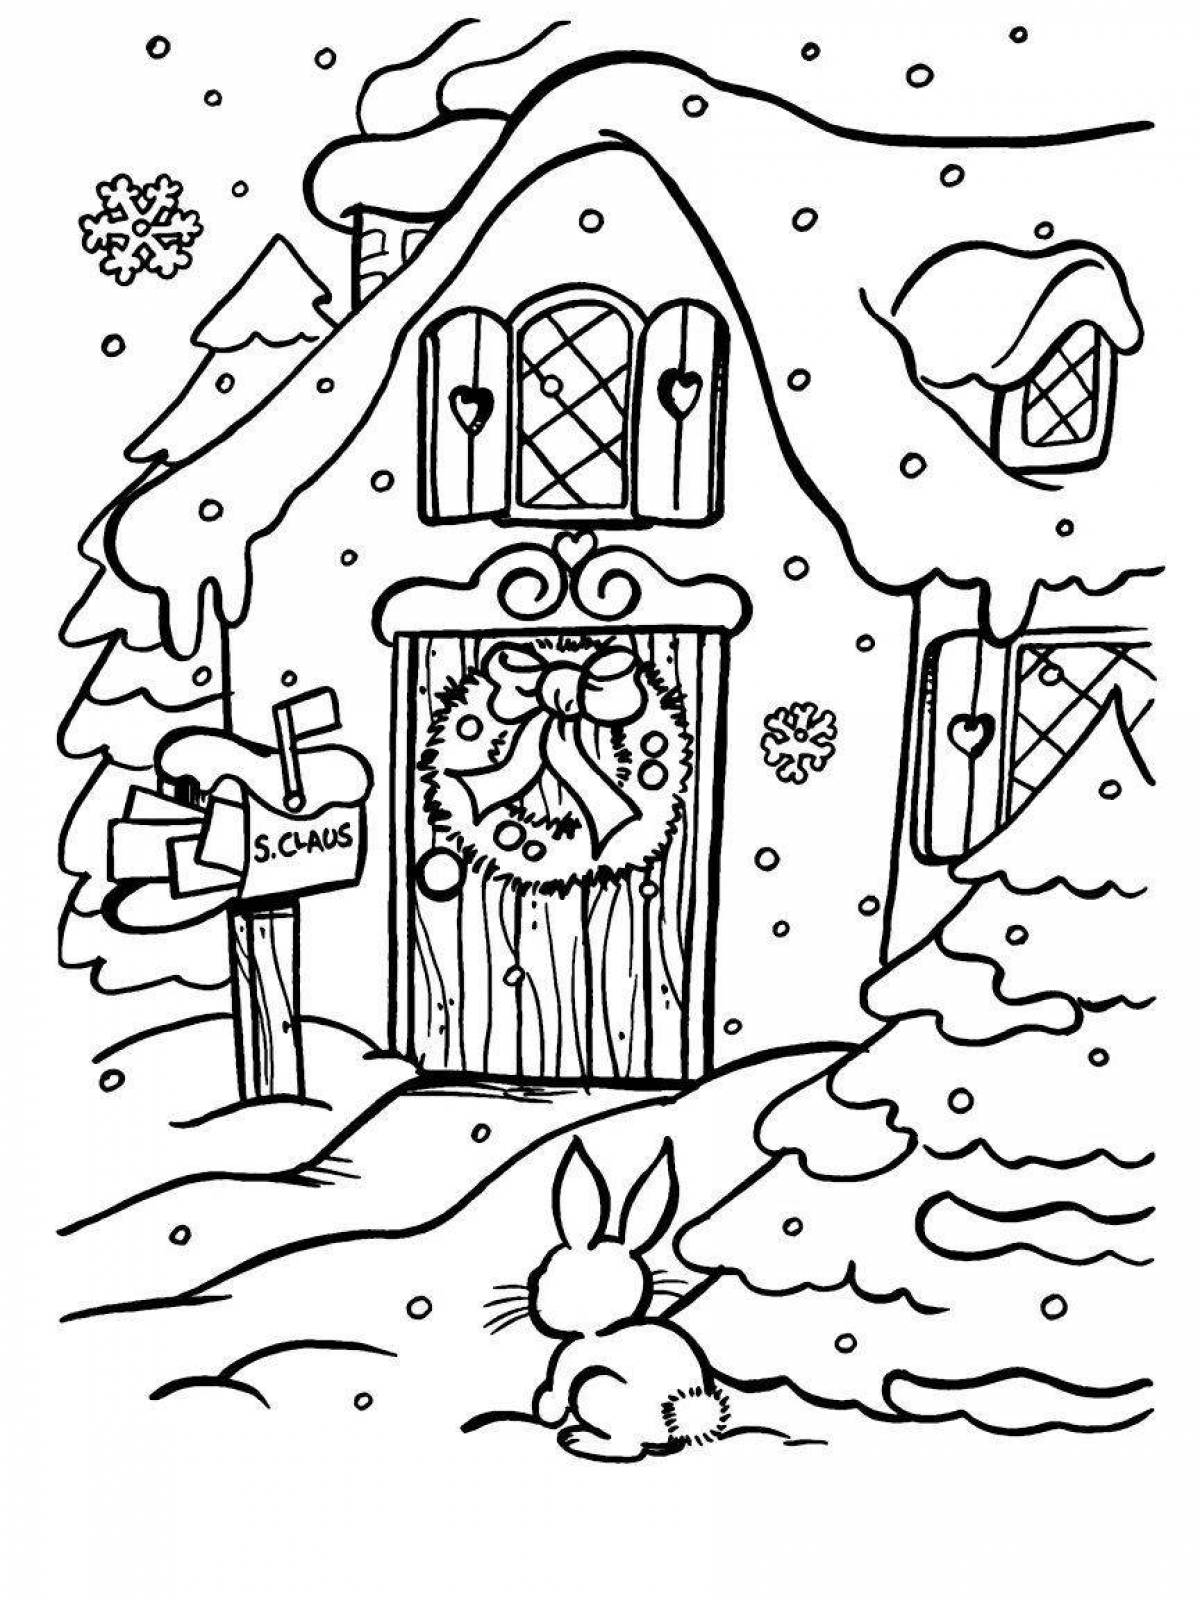 Adorable winter house coloring book for kids